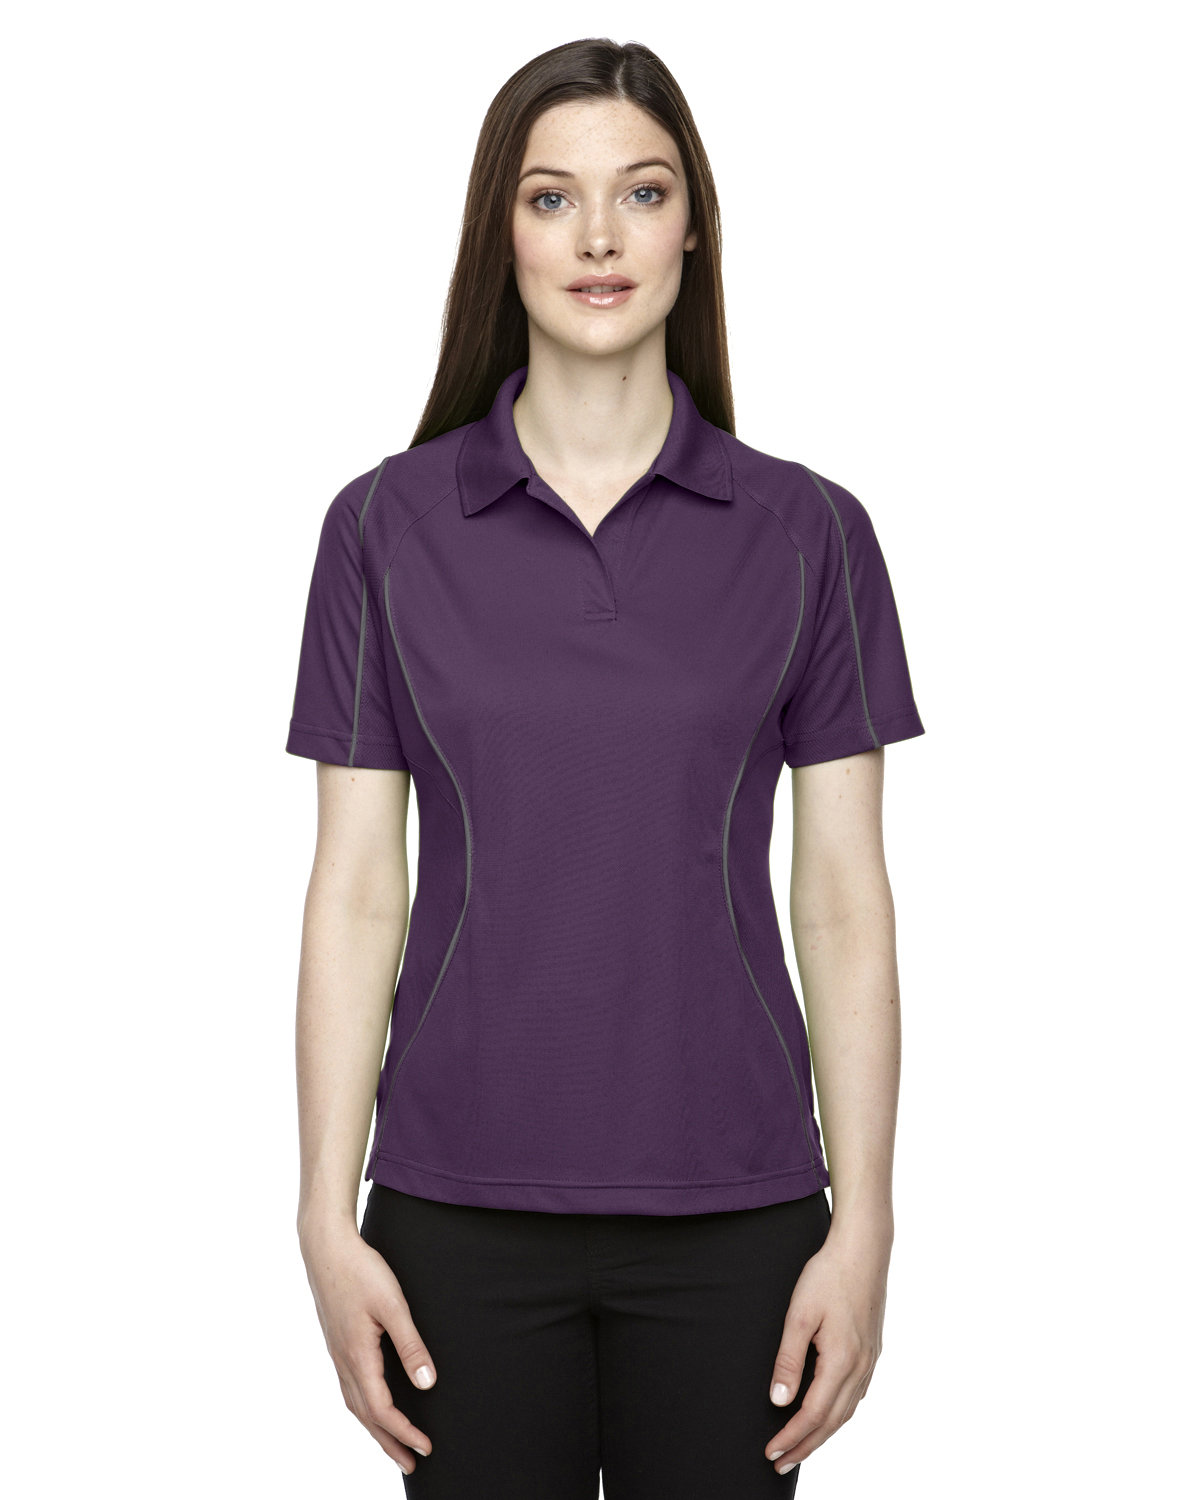 Extreme Ladies' Eperformance™ Velocity Snag Protection Colorblock Polo with Piping MULBERRY PURPLE 